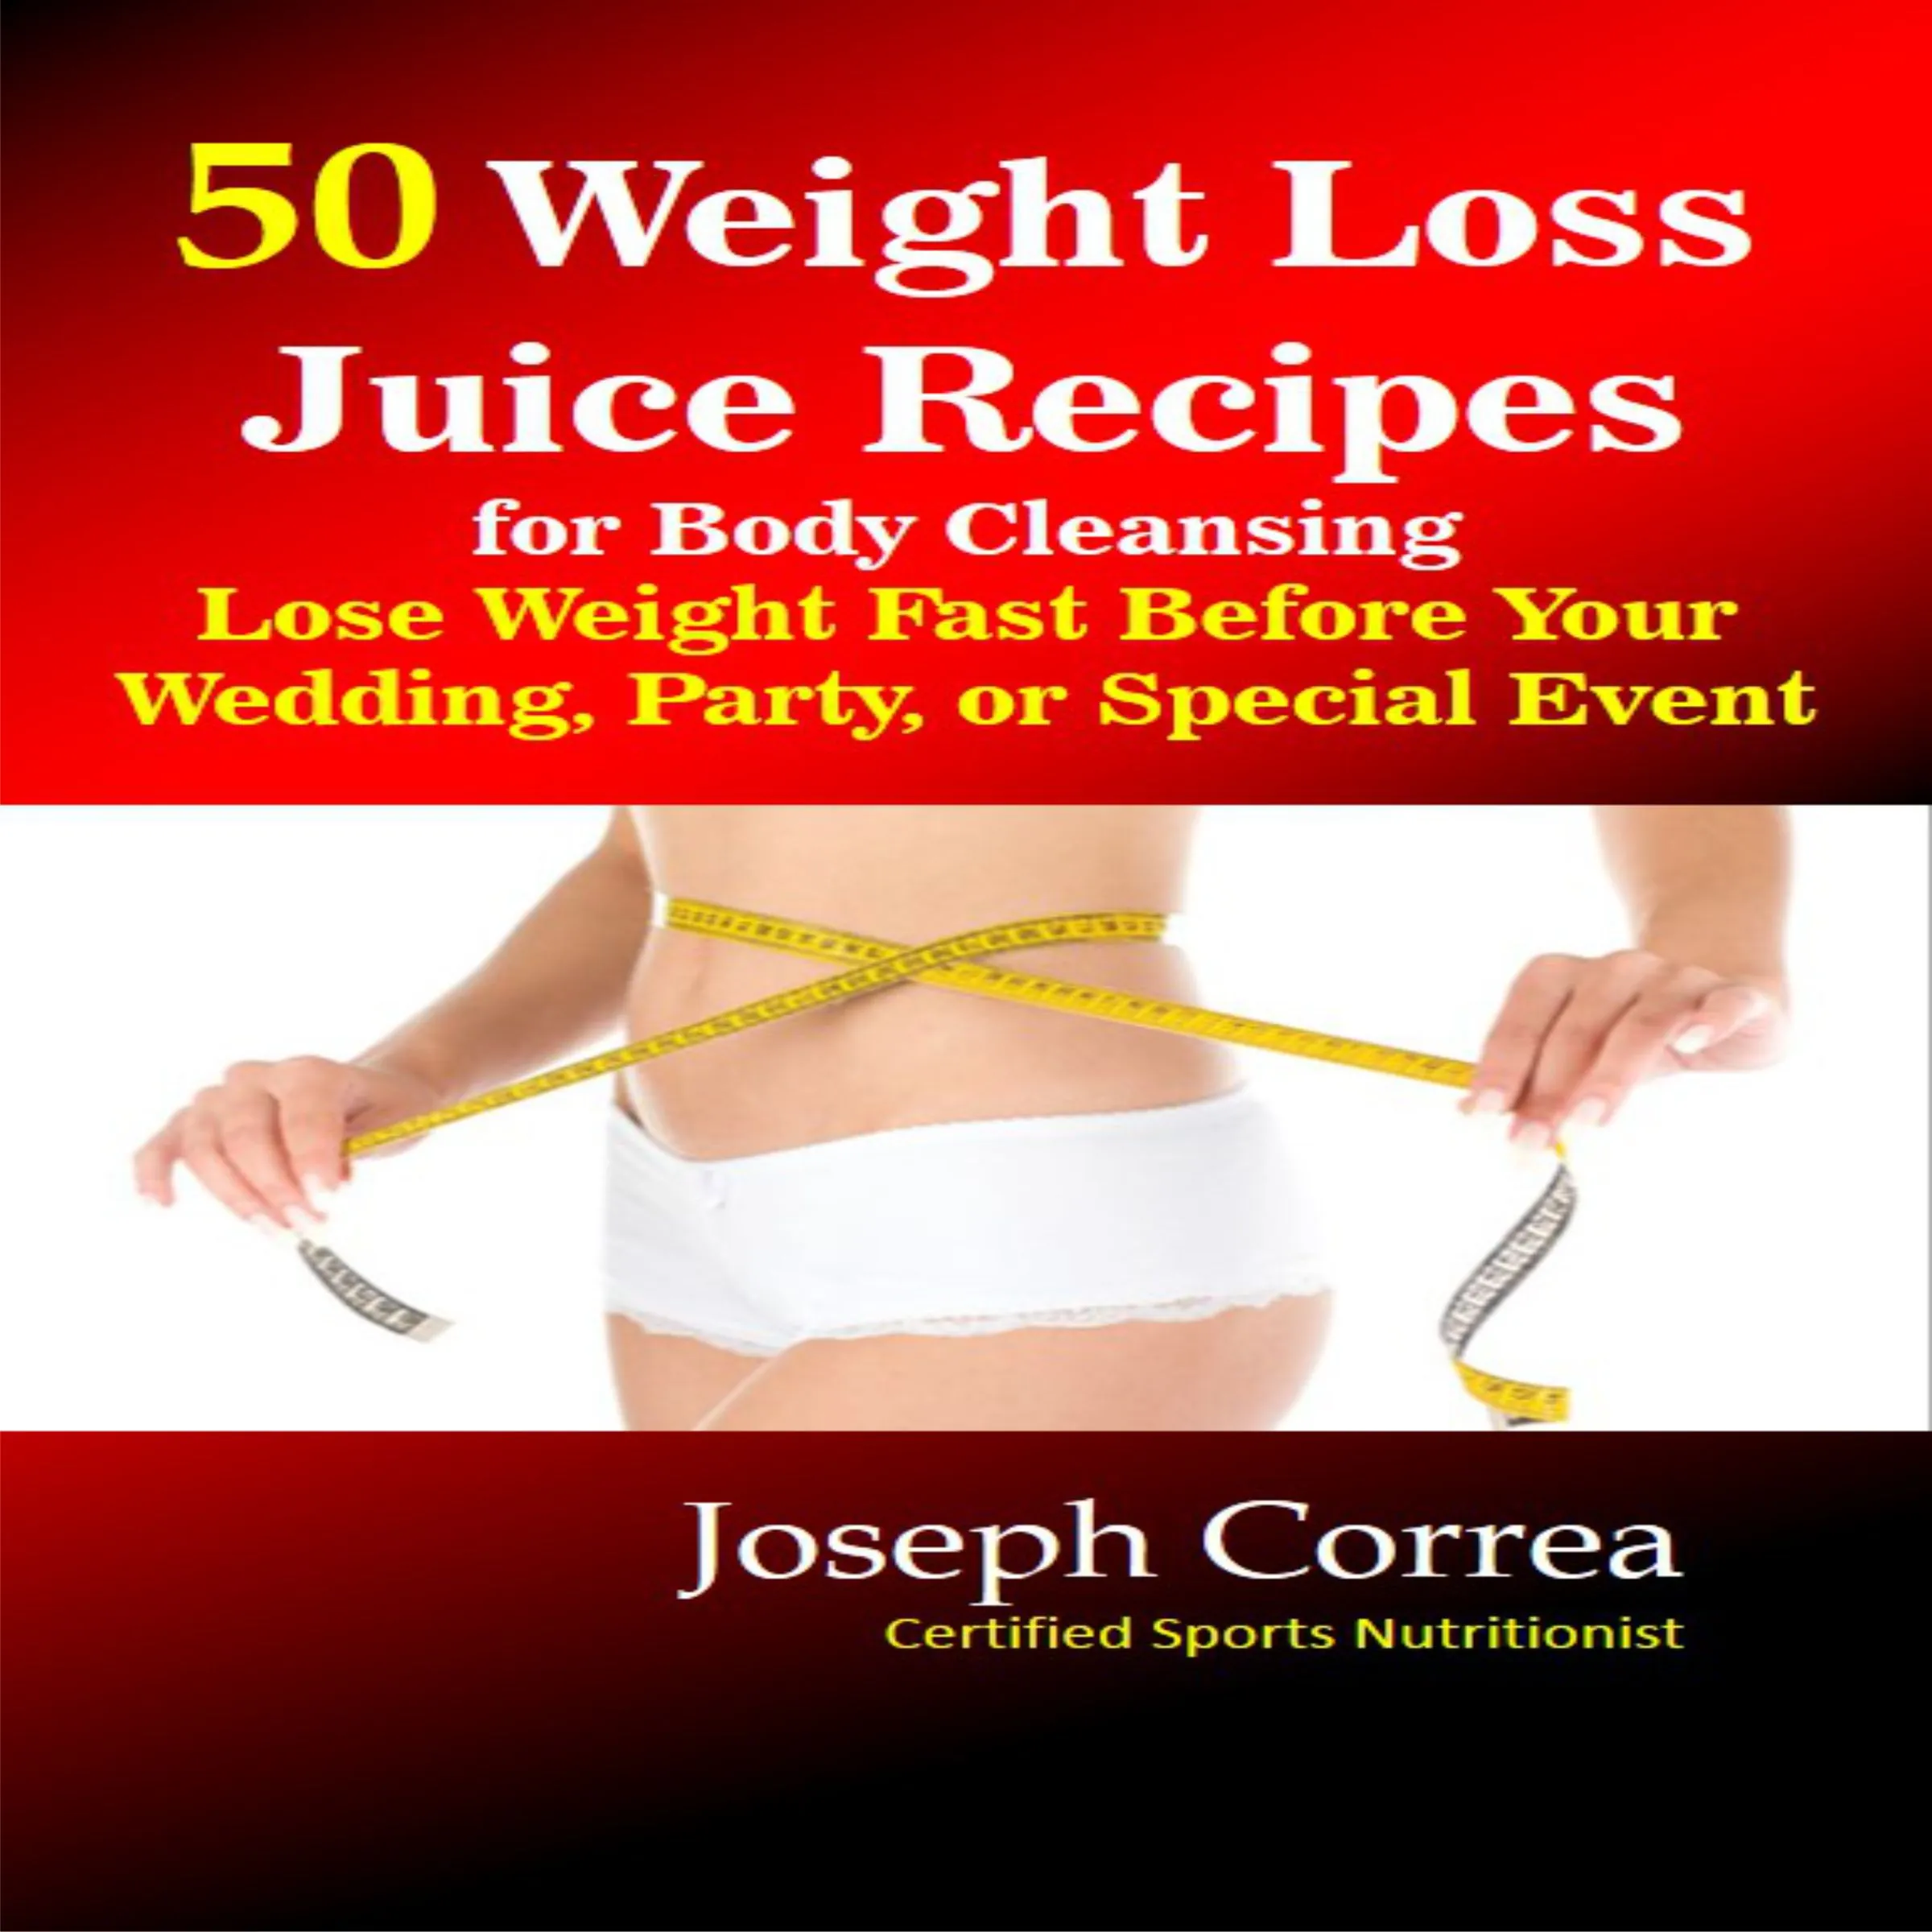 50 Weight Loss Juice Recipes for Body Cleansing: Lose Weight Fast Before Your Wedding, Party, or Special Event Audiobook by Joseph Correa